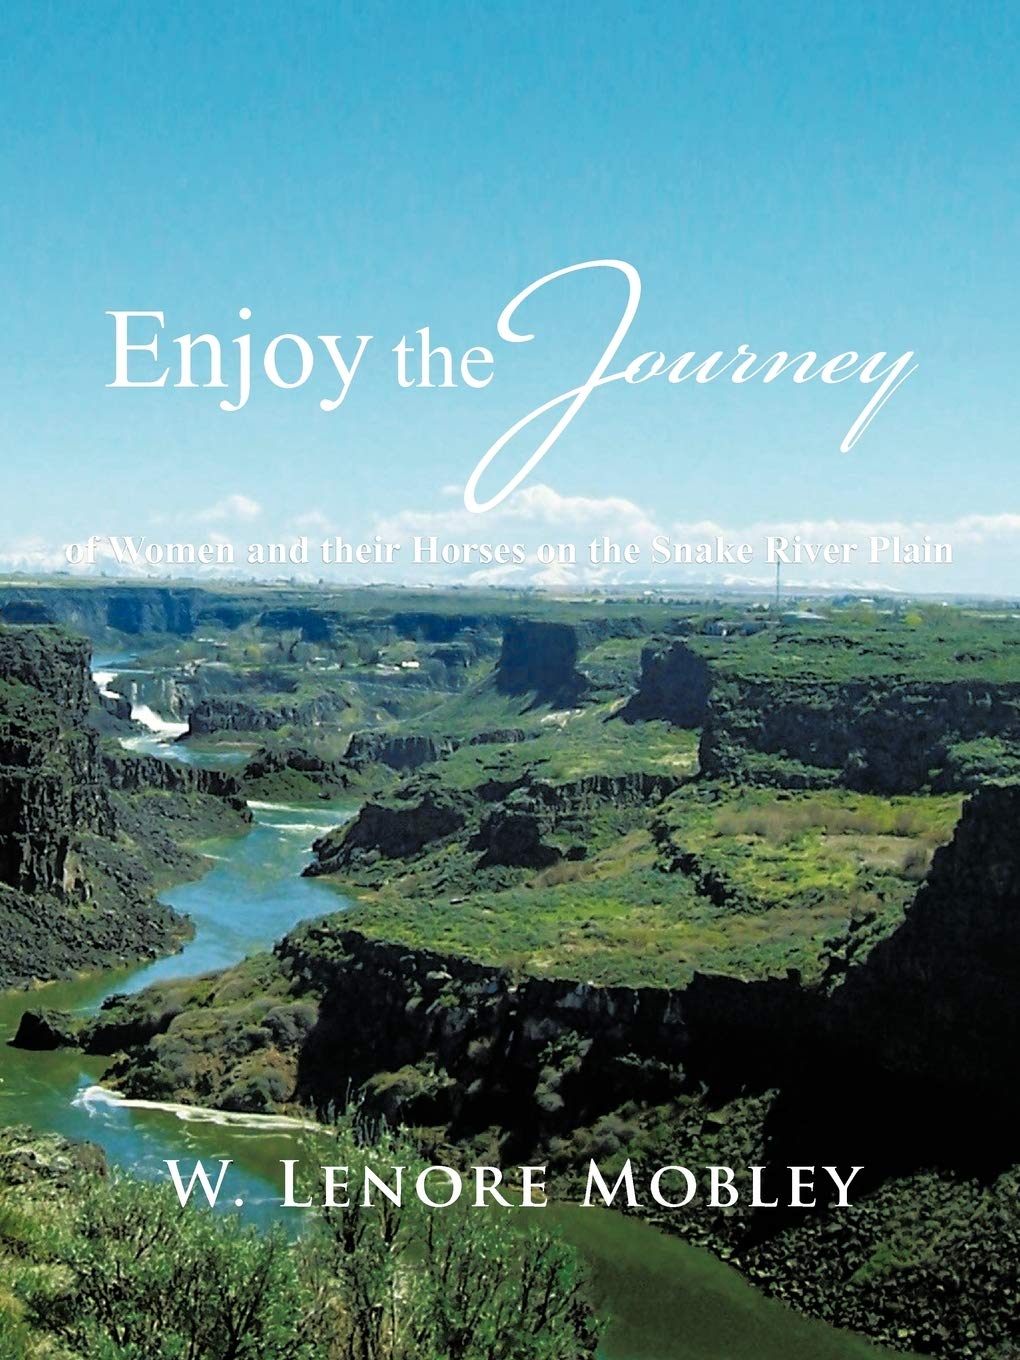 Enjoy the journey: Of women and their horses along the Snake River Plain (book cover)